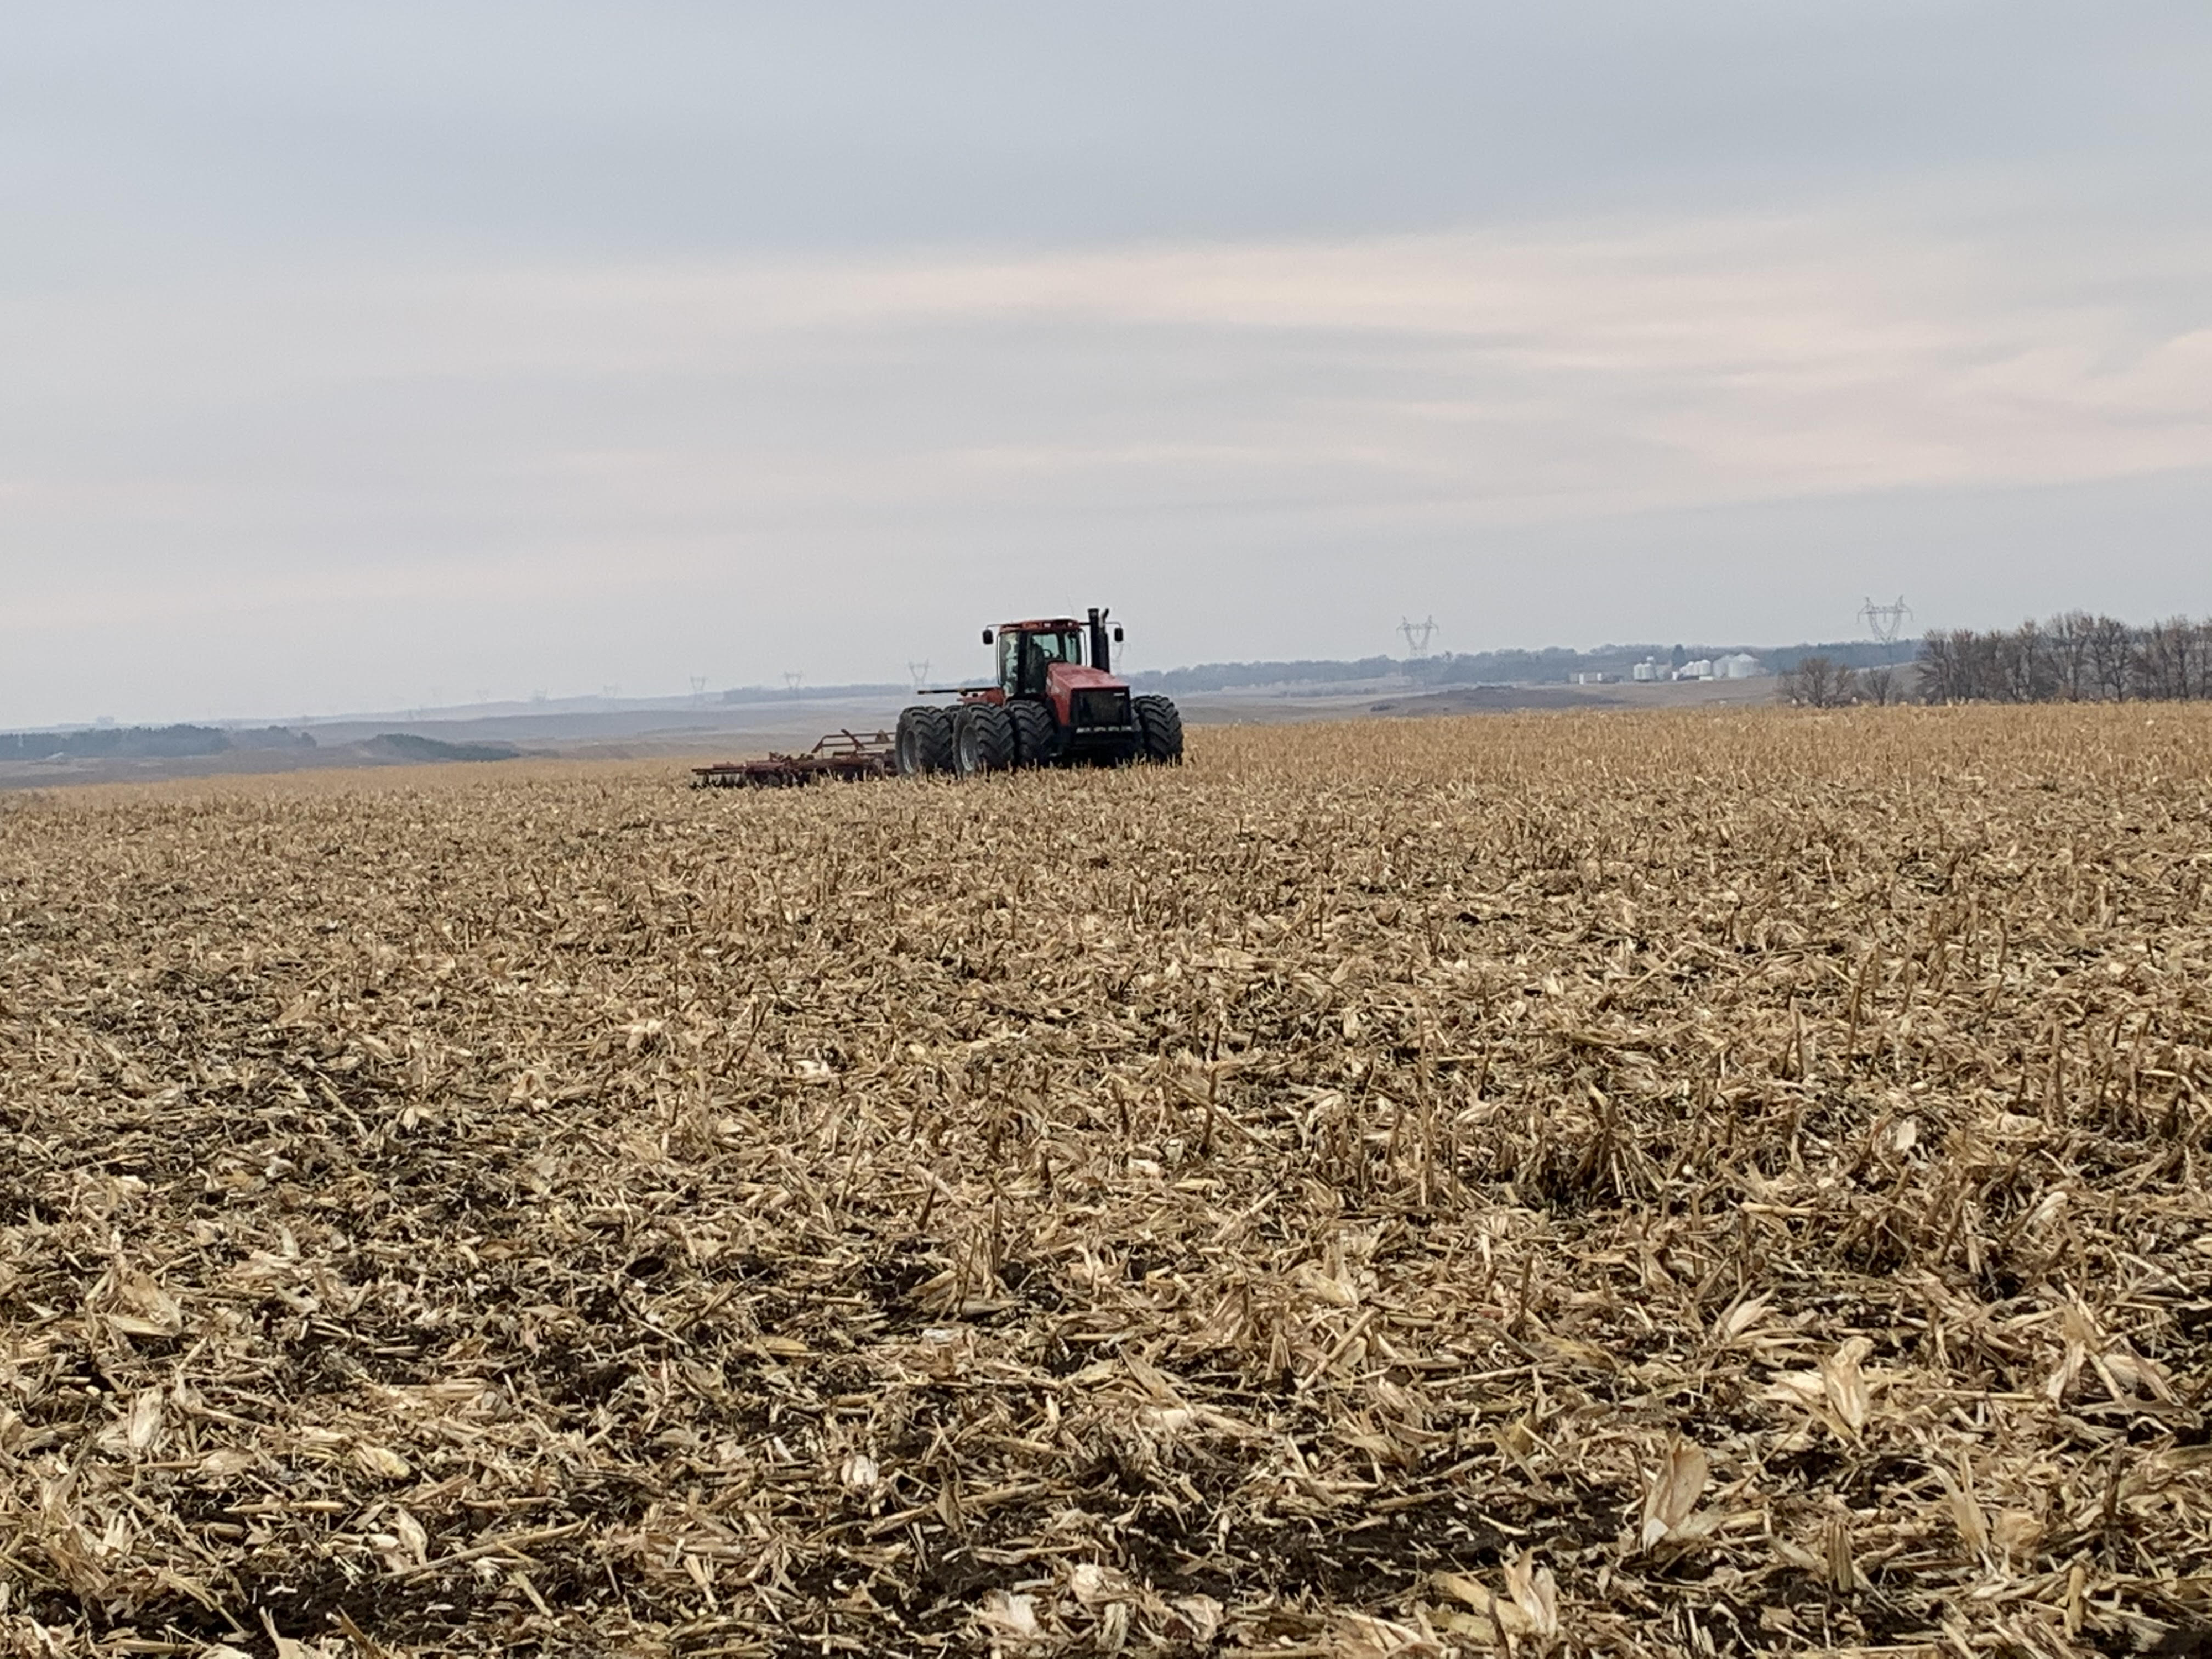 Morning Ag News, January 11, 2022: AFBF economist says past issues are spilling into 2022